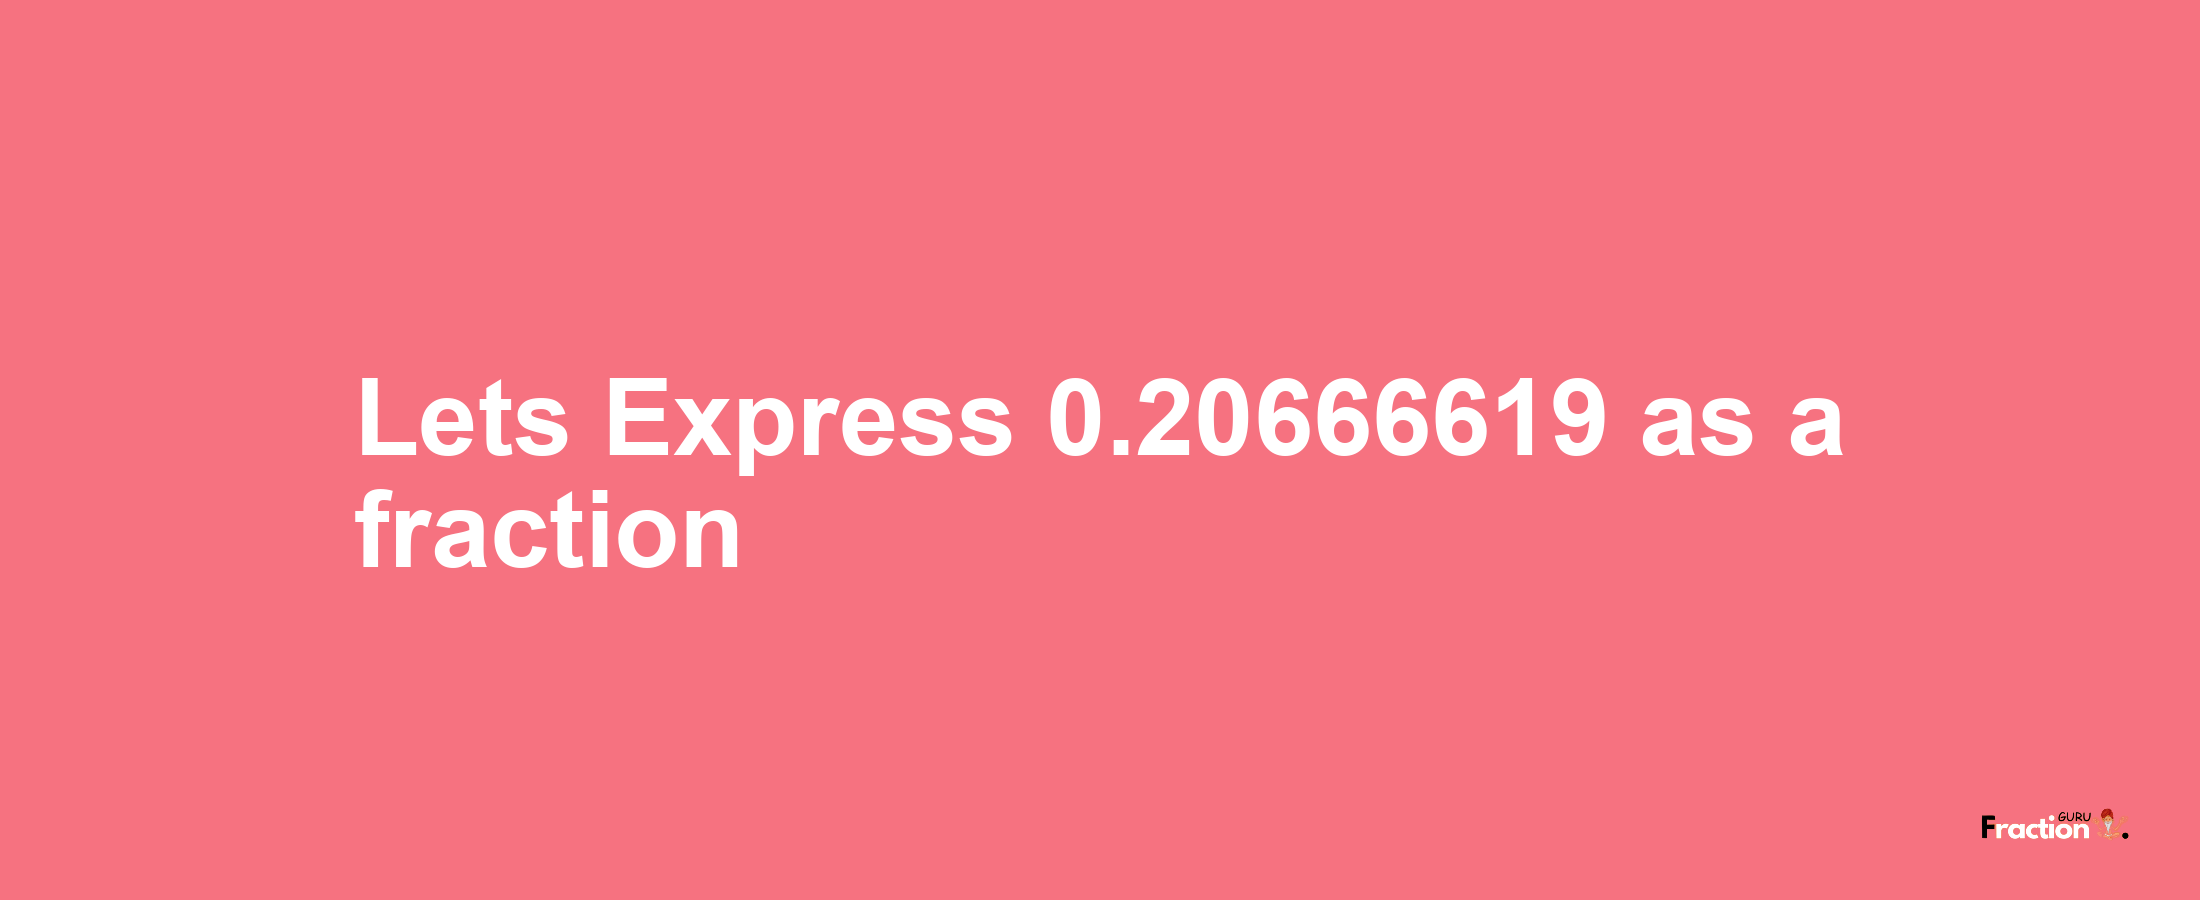 Lets Express 0.20666619 as afraction